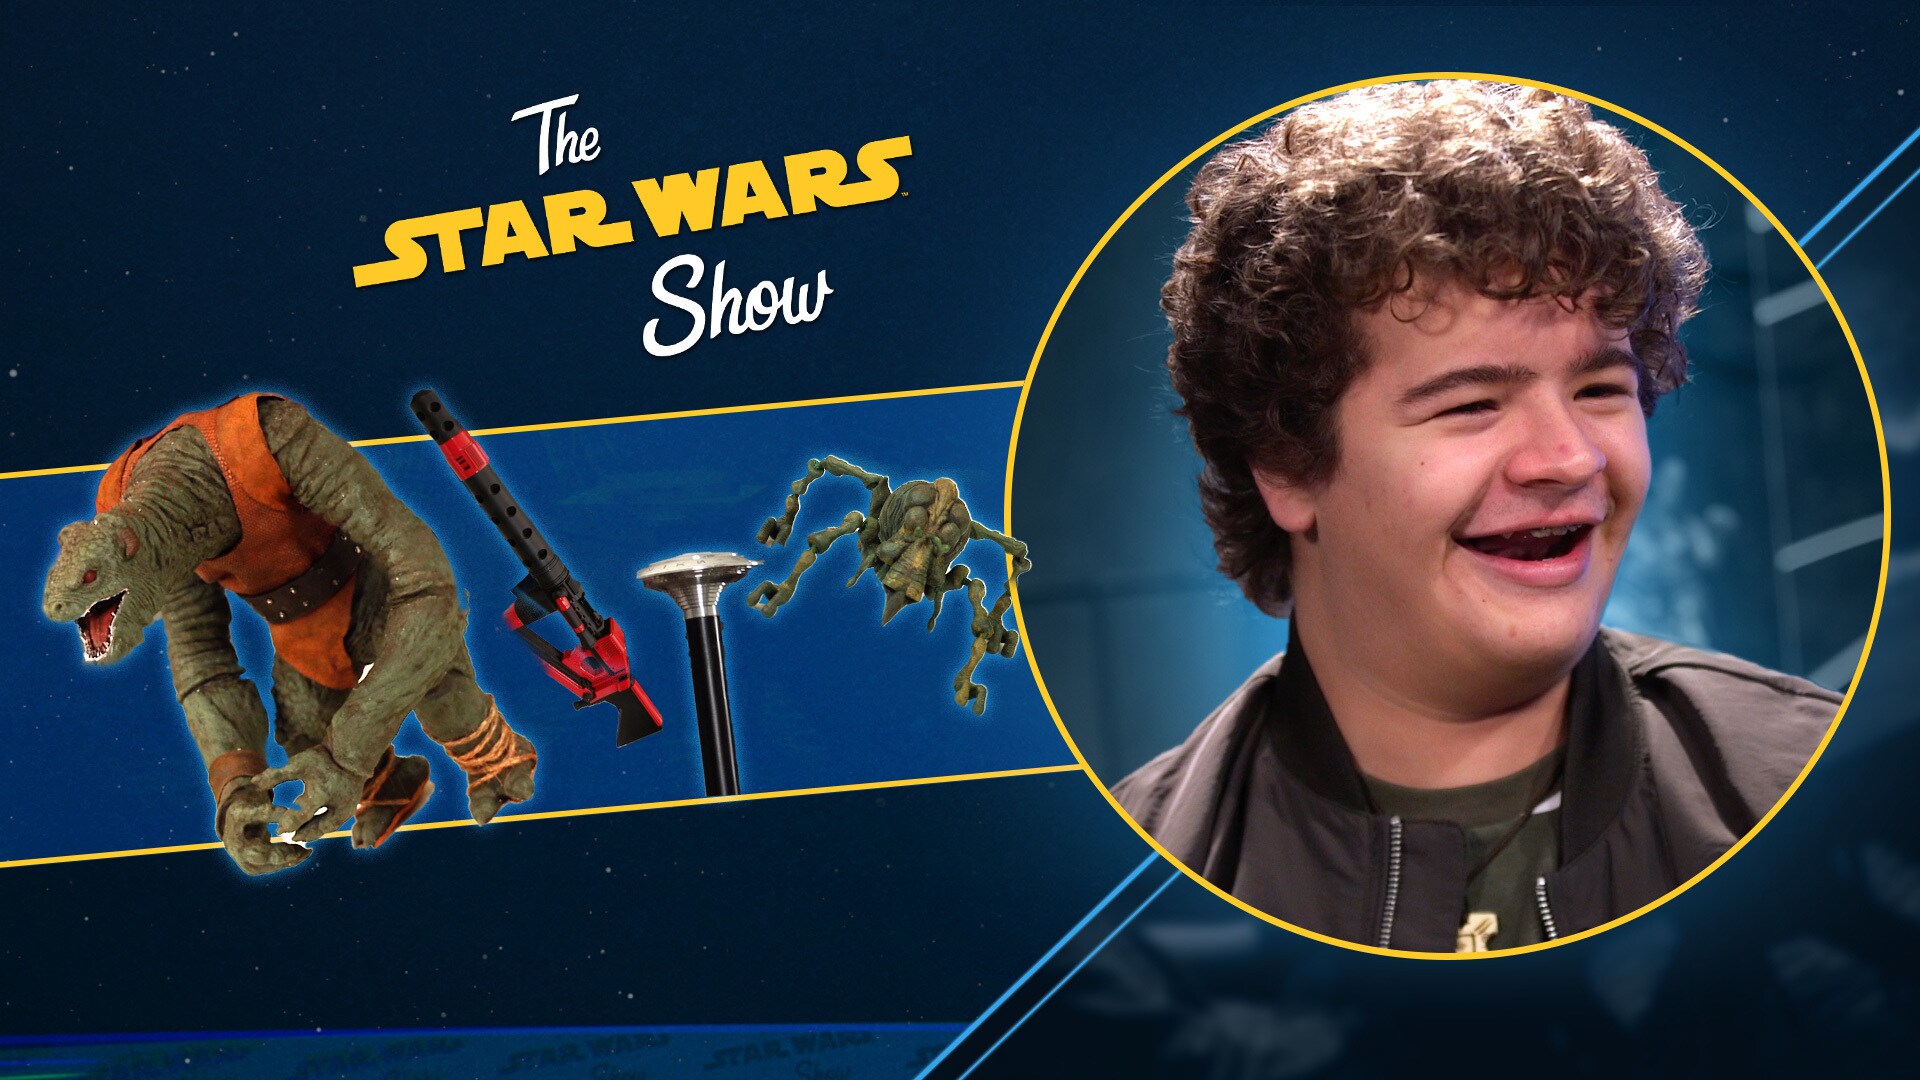 The Star Wars Show Changes Things Up, Plus We Talk With Gaten Matarazzo from Stranger Things